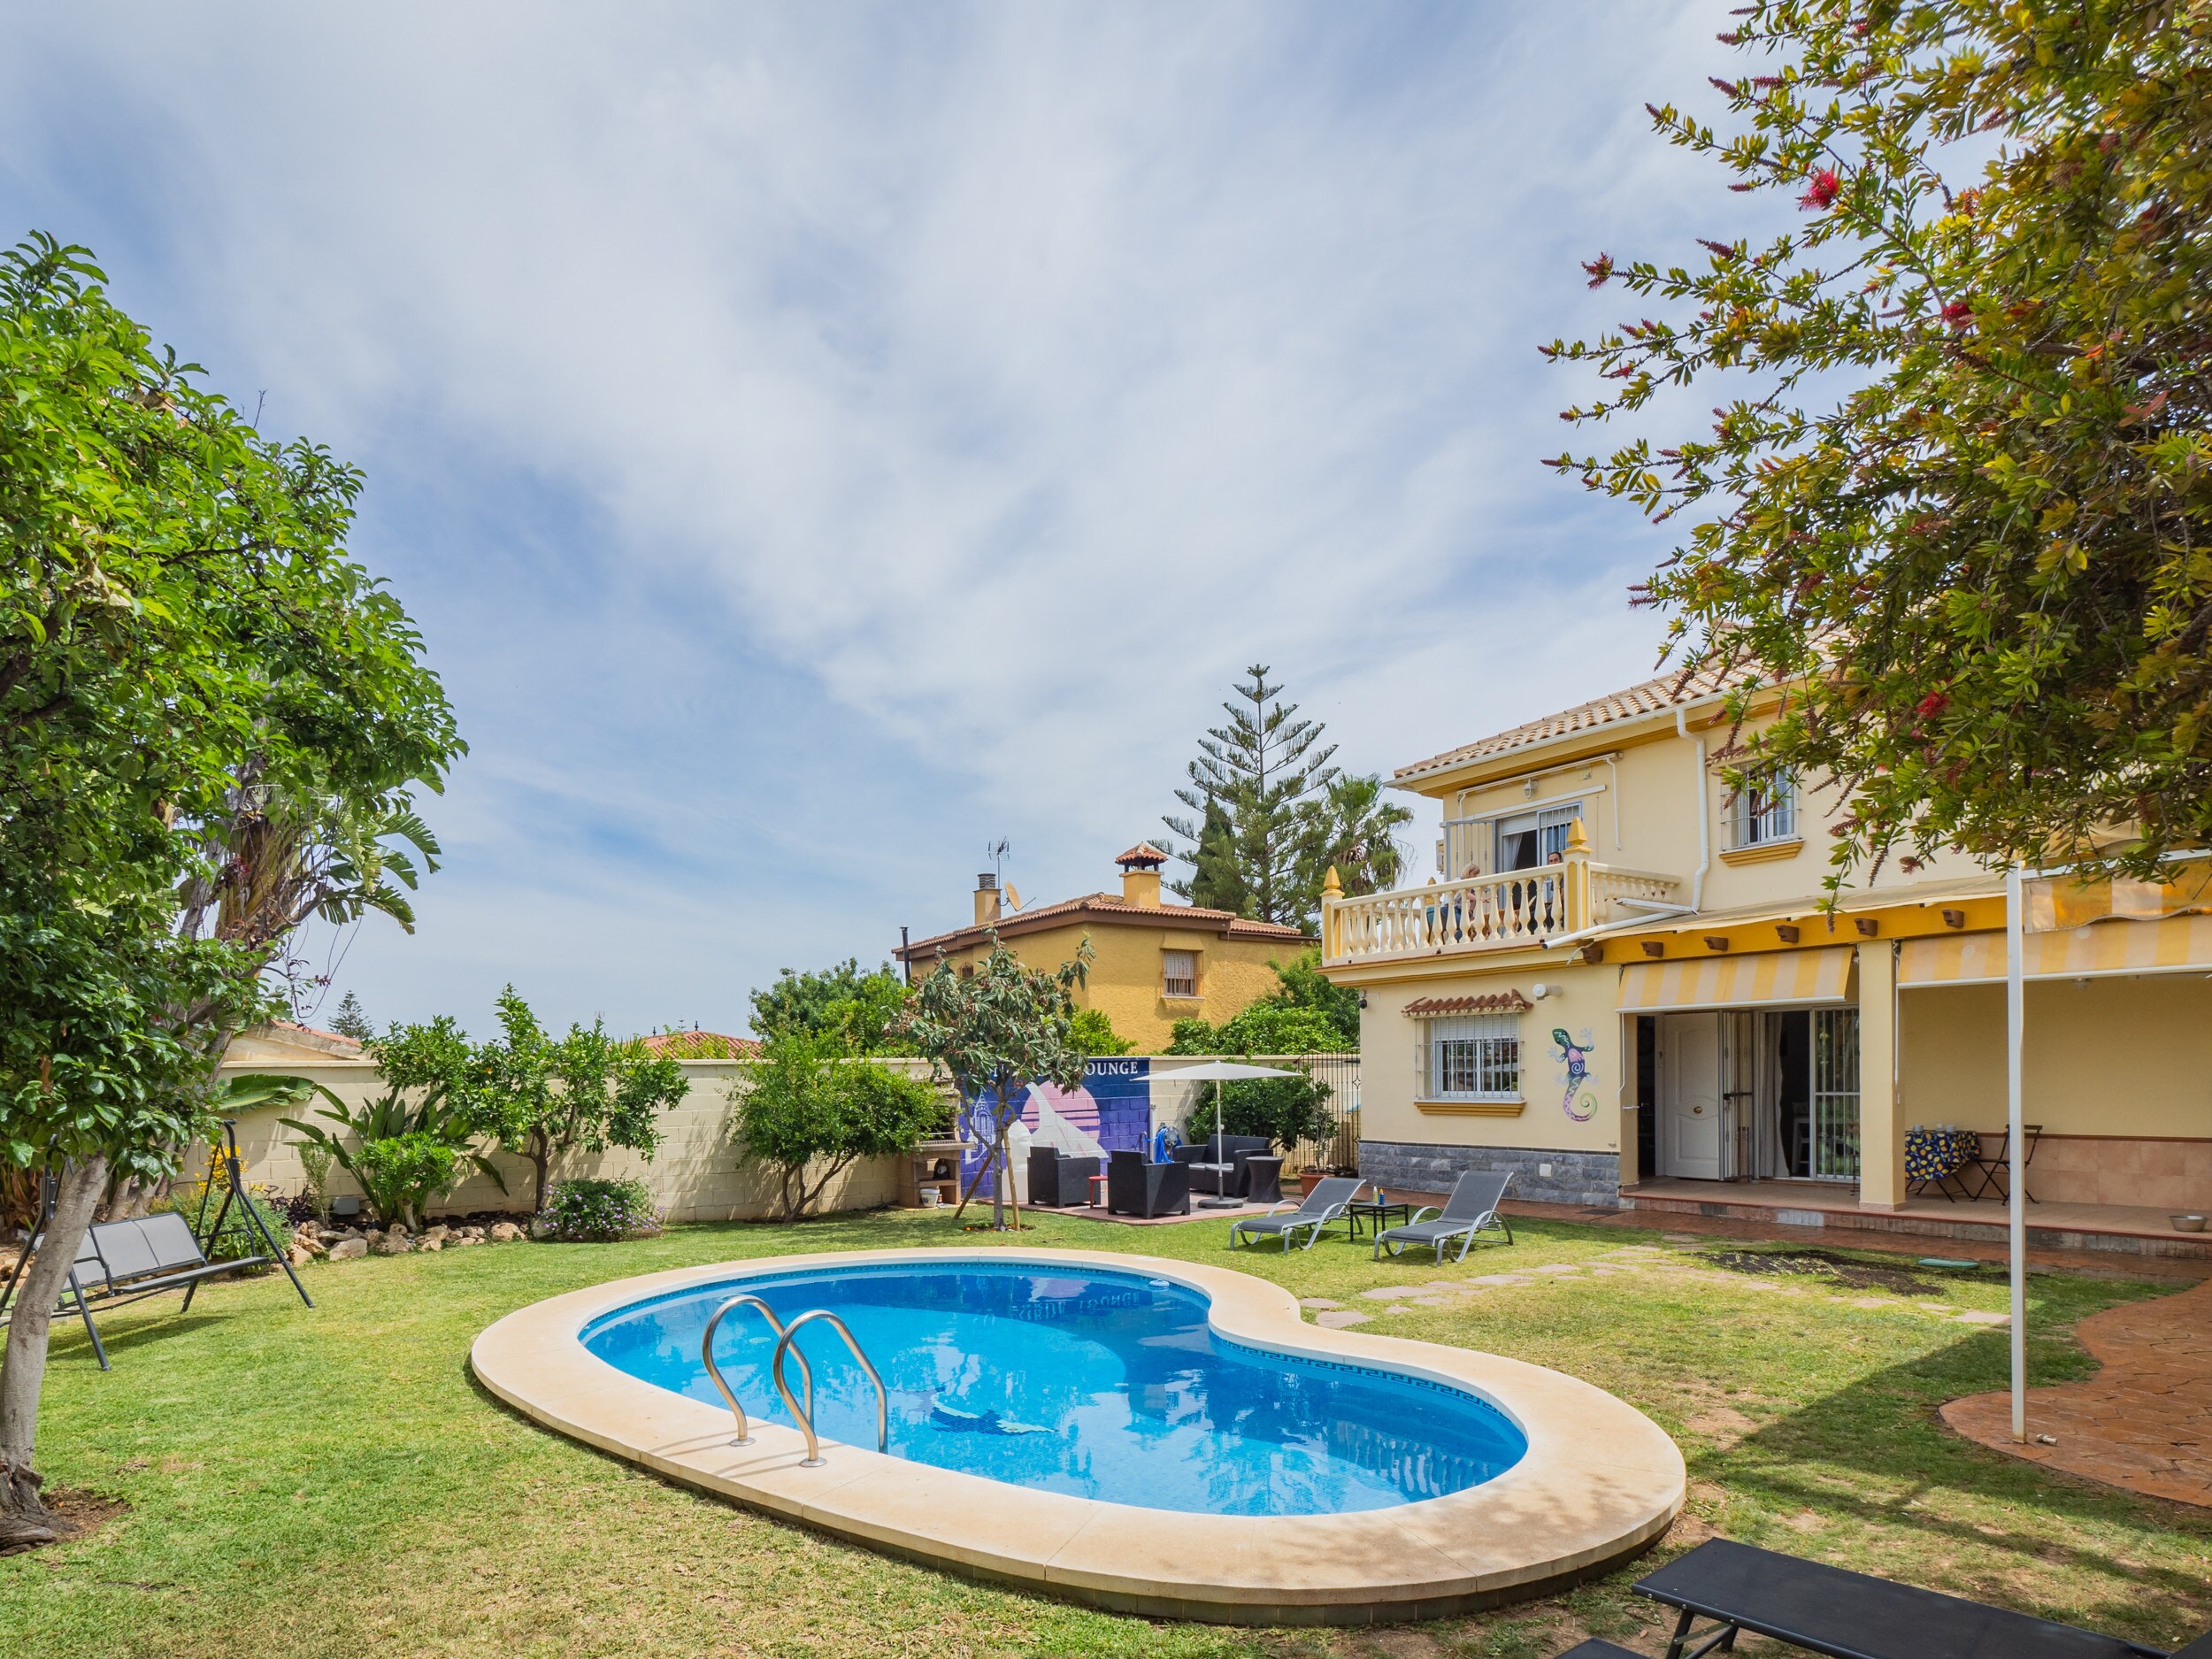 Wonderful country house with swimming pool for 8 people in Alhaurín el Grande